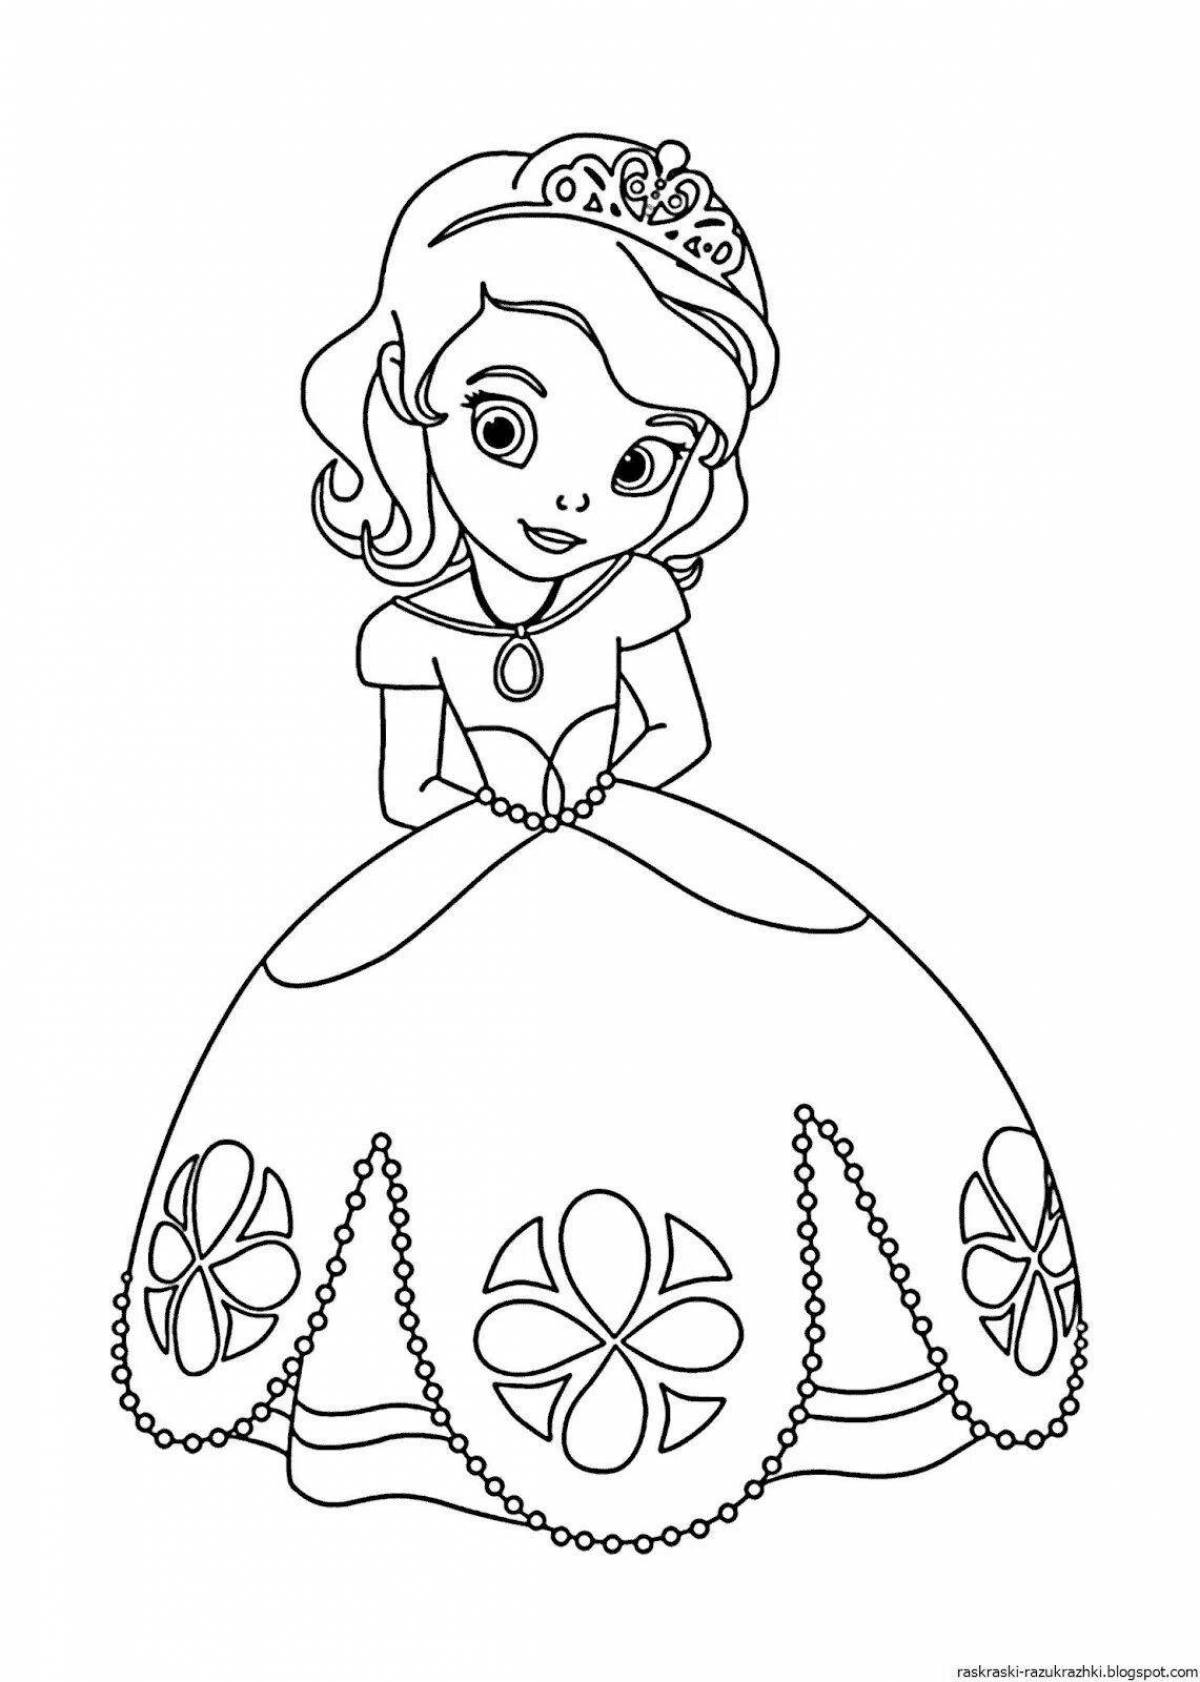 Charming coloring book for 3 year old girls, princess